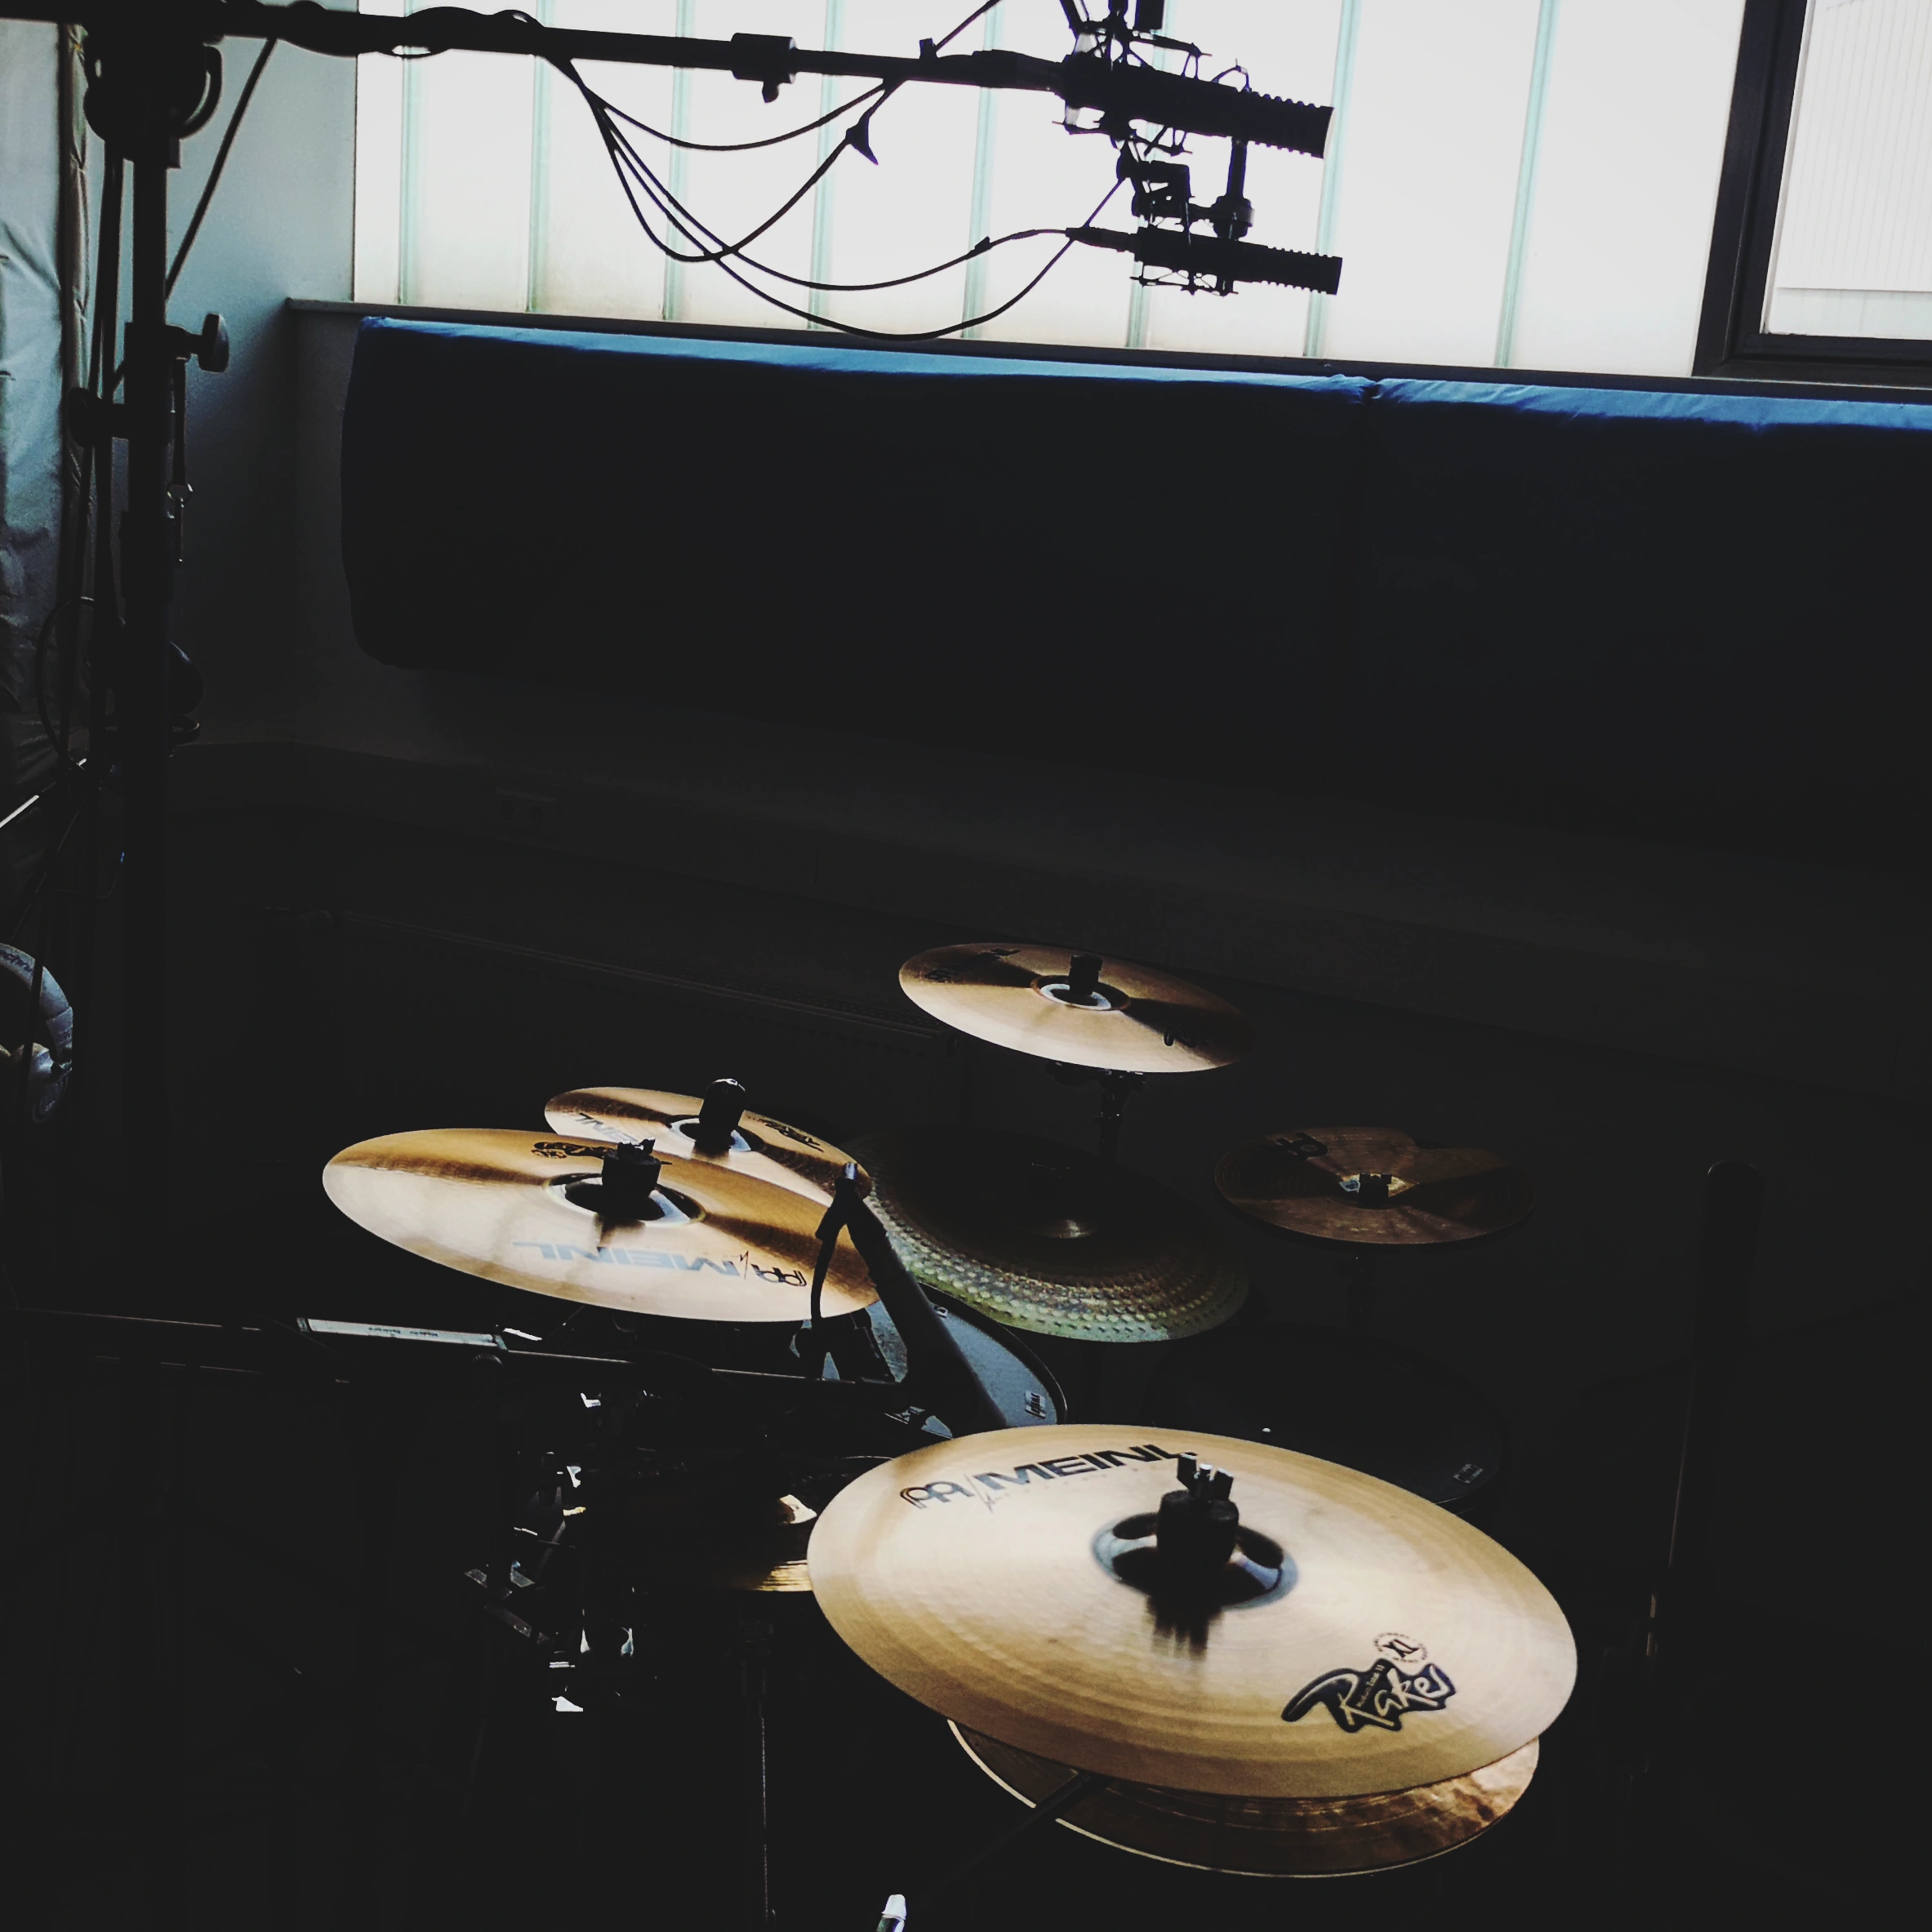 Drum-Recordings using 2x Royer R101 & 2x Schoeps CMC-64 as Overheads